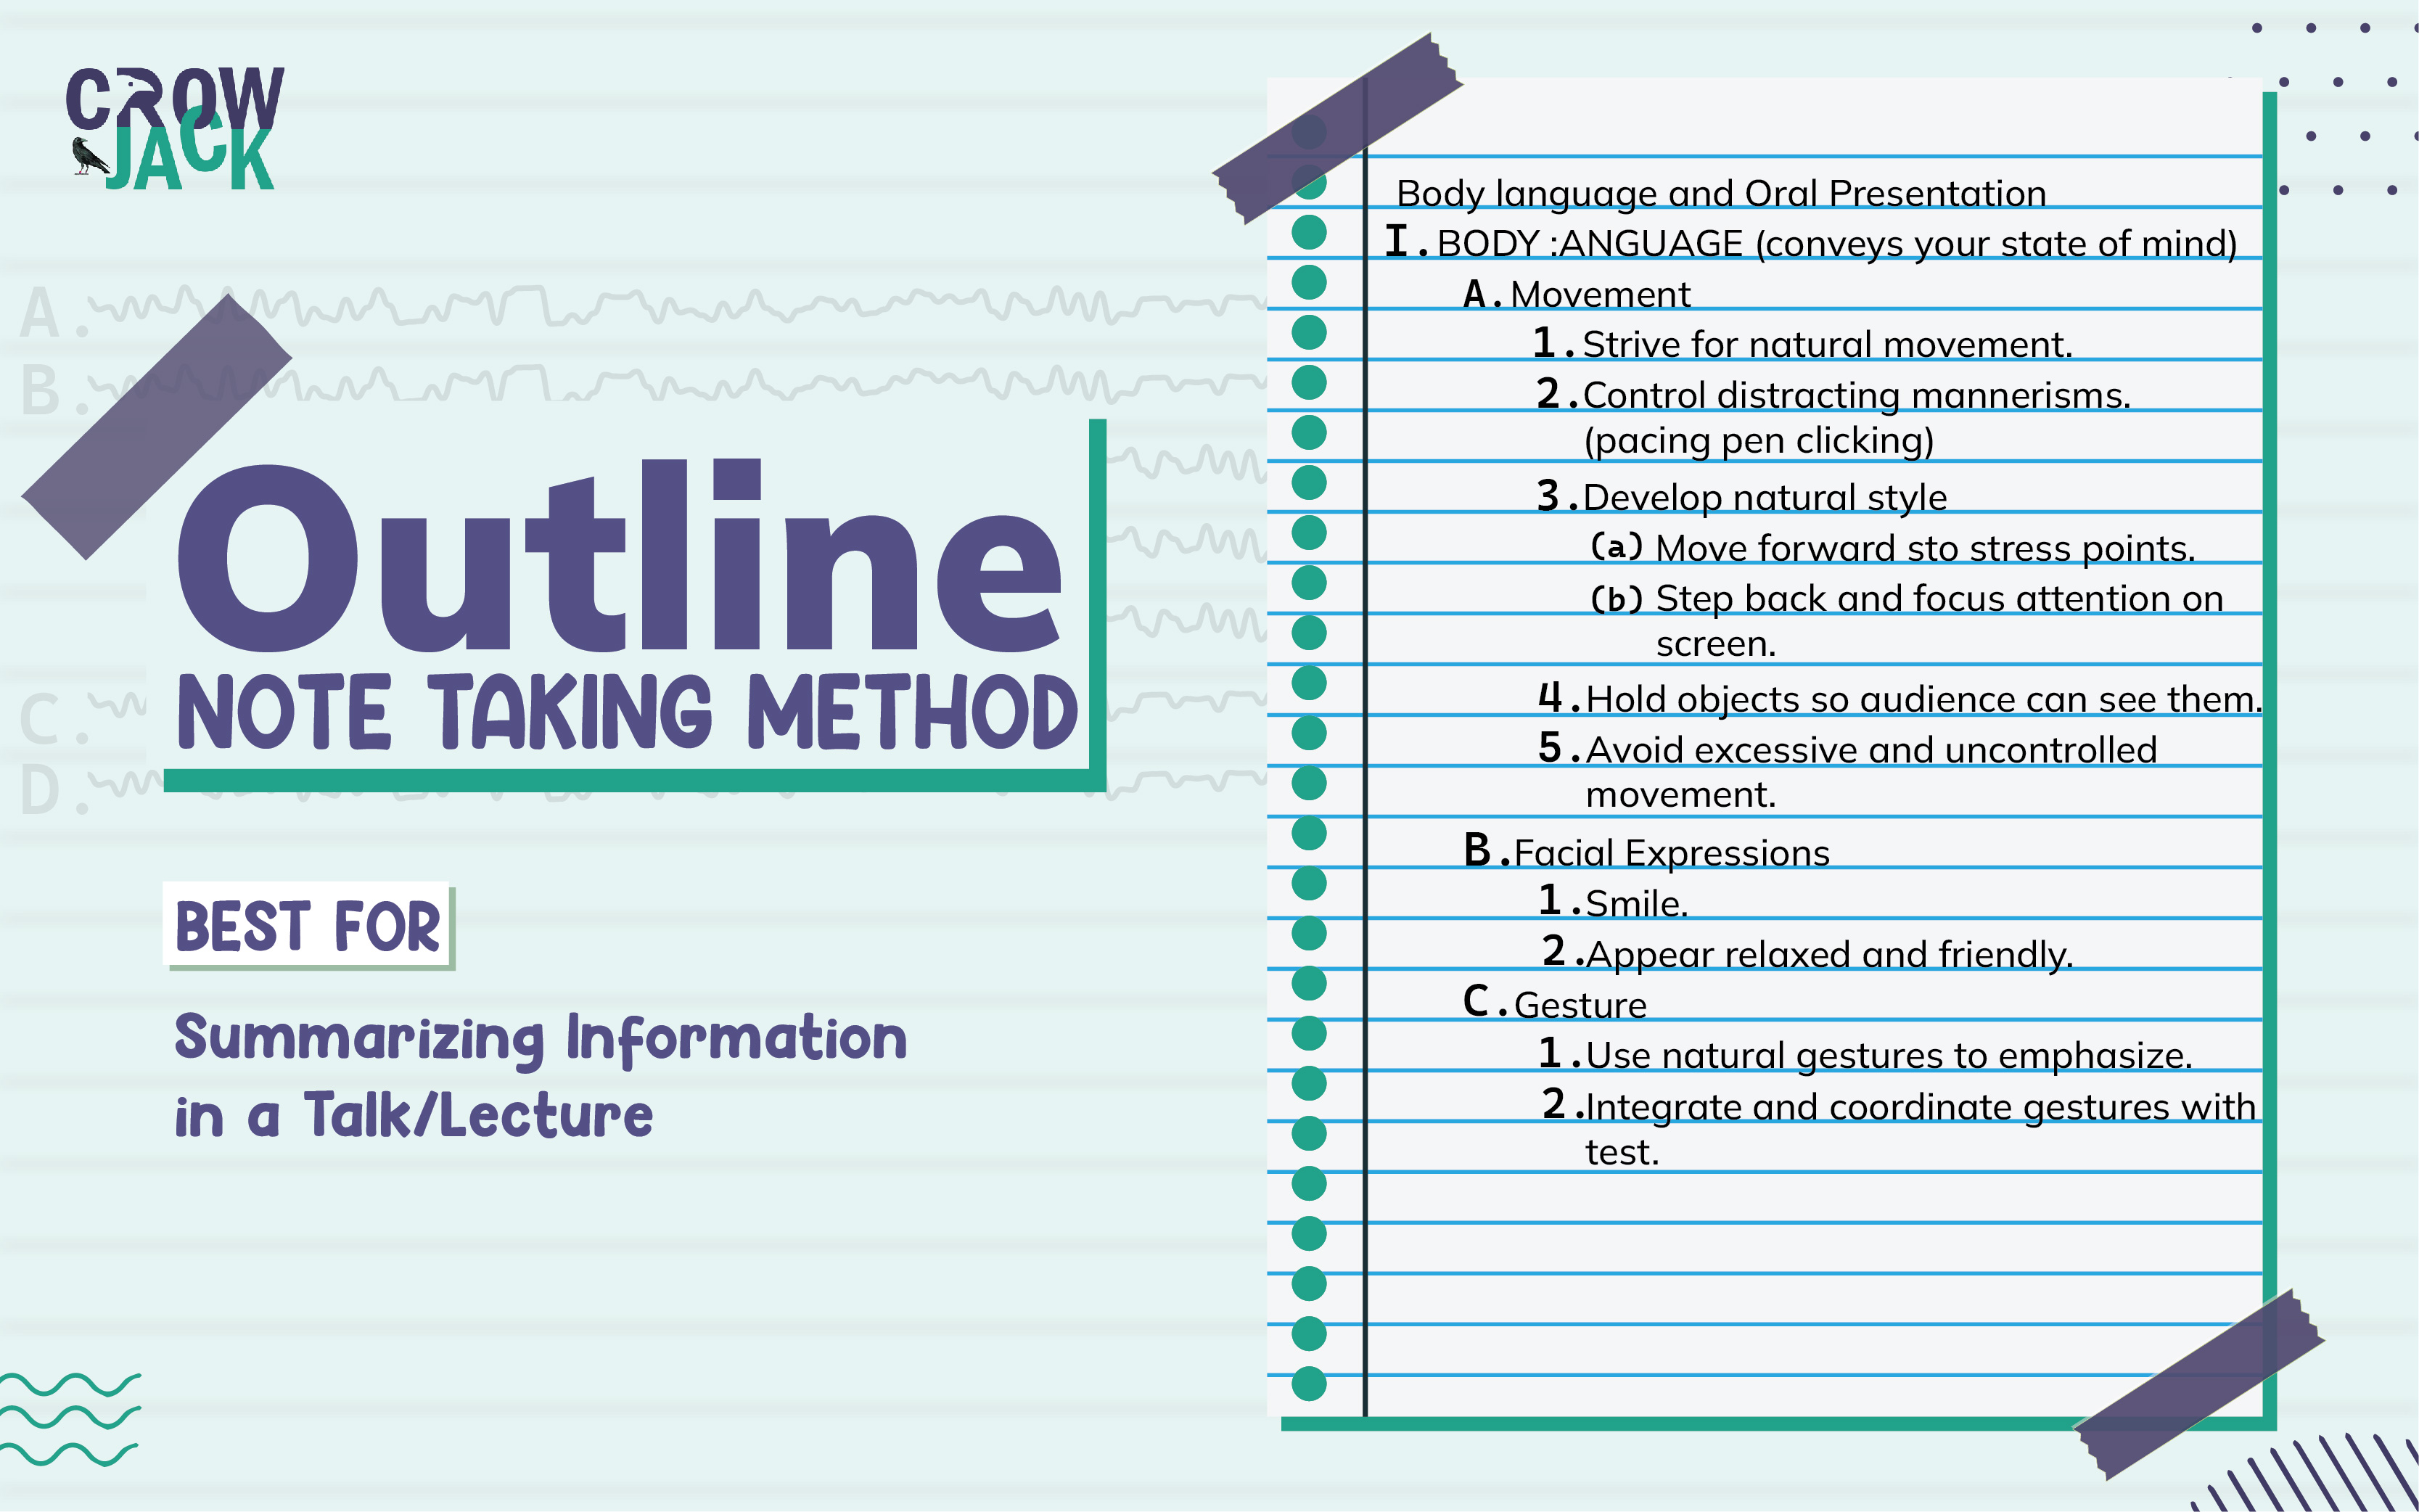 When to use the outlining method for note taking